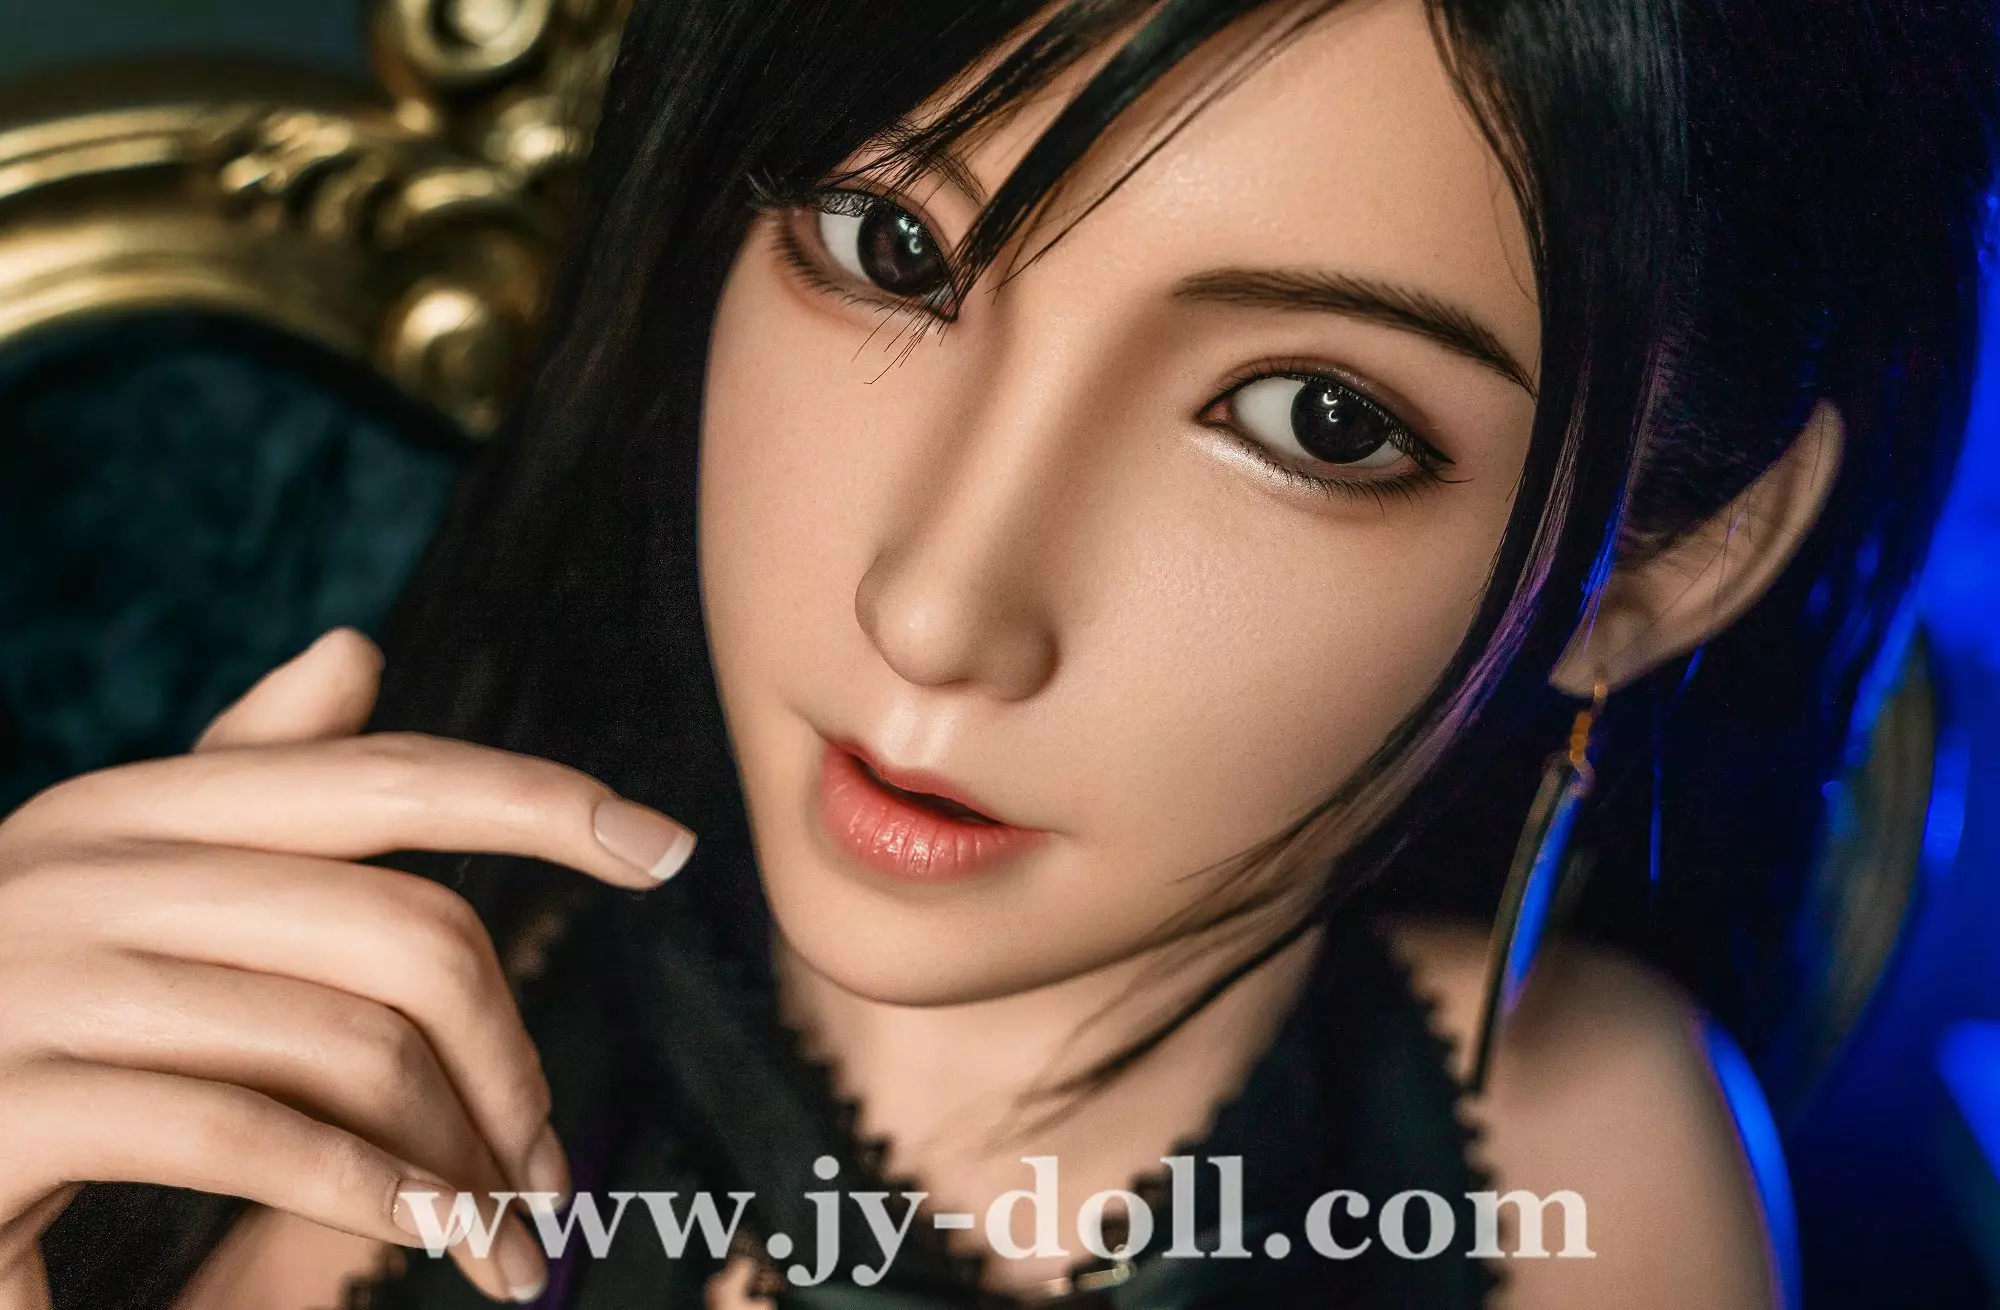 JY Doll 163cm full silicone doll Annie with movable jaw